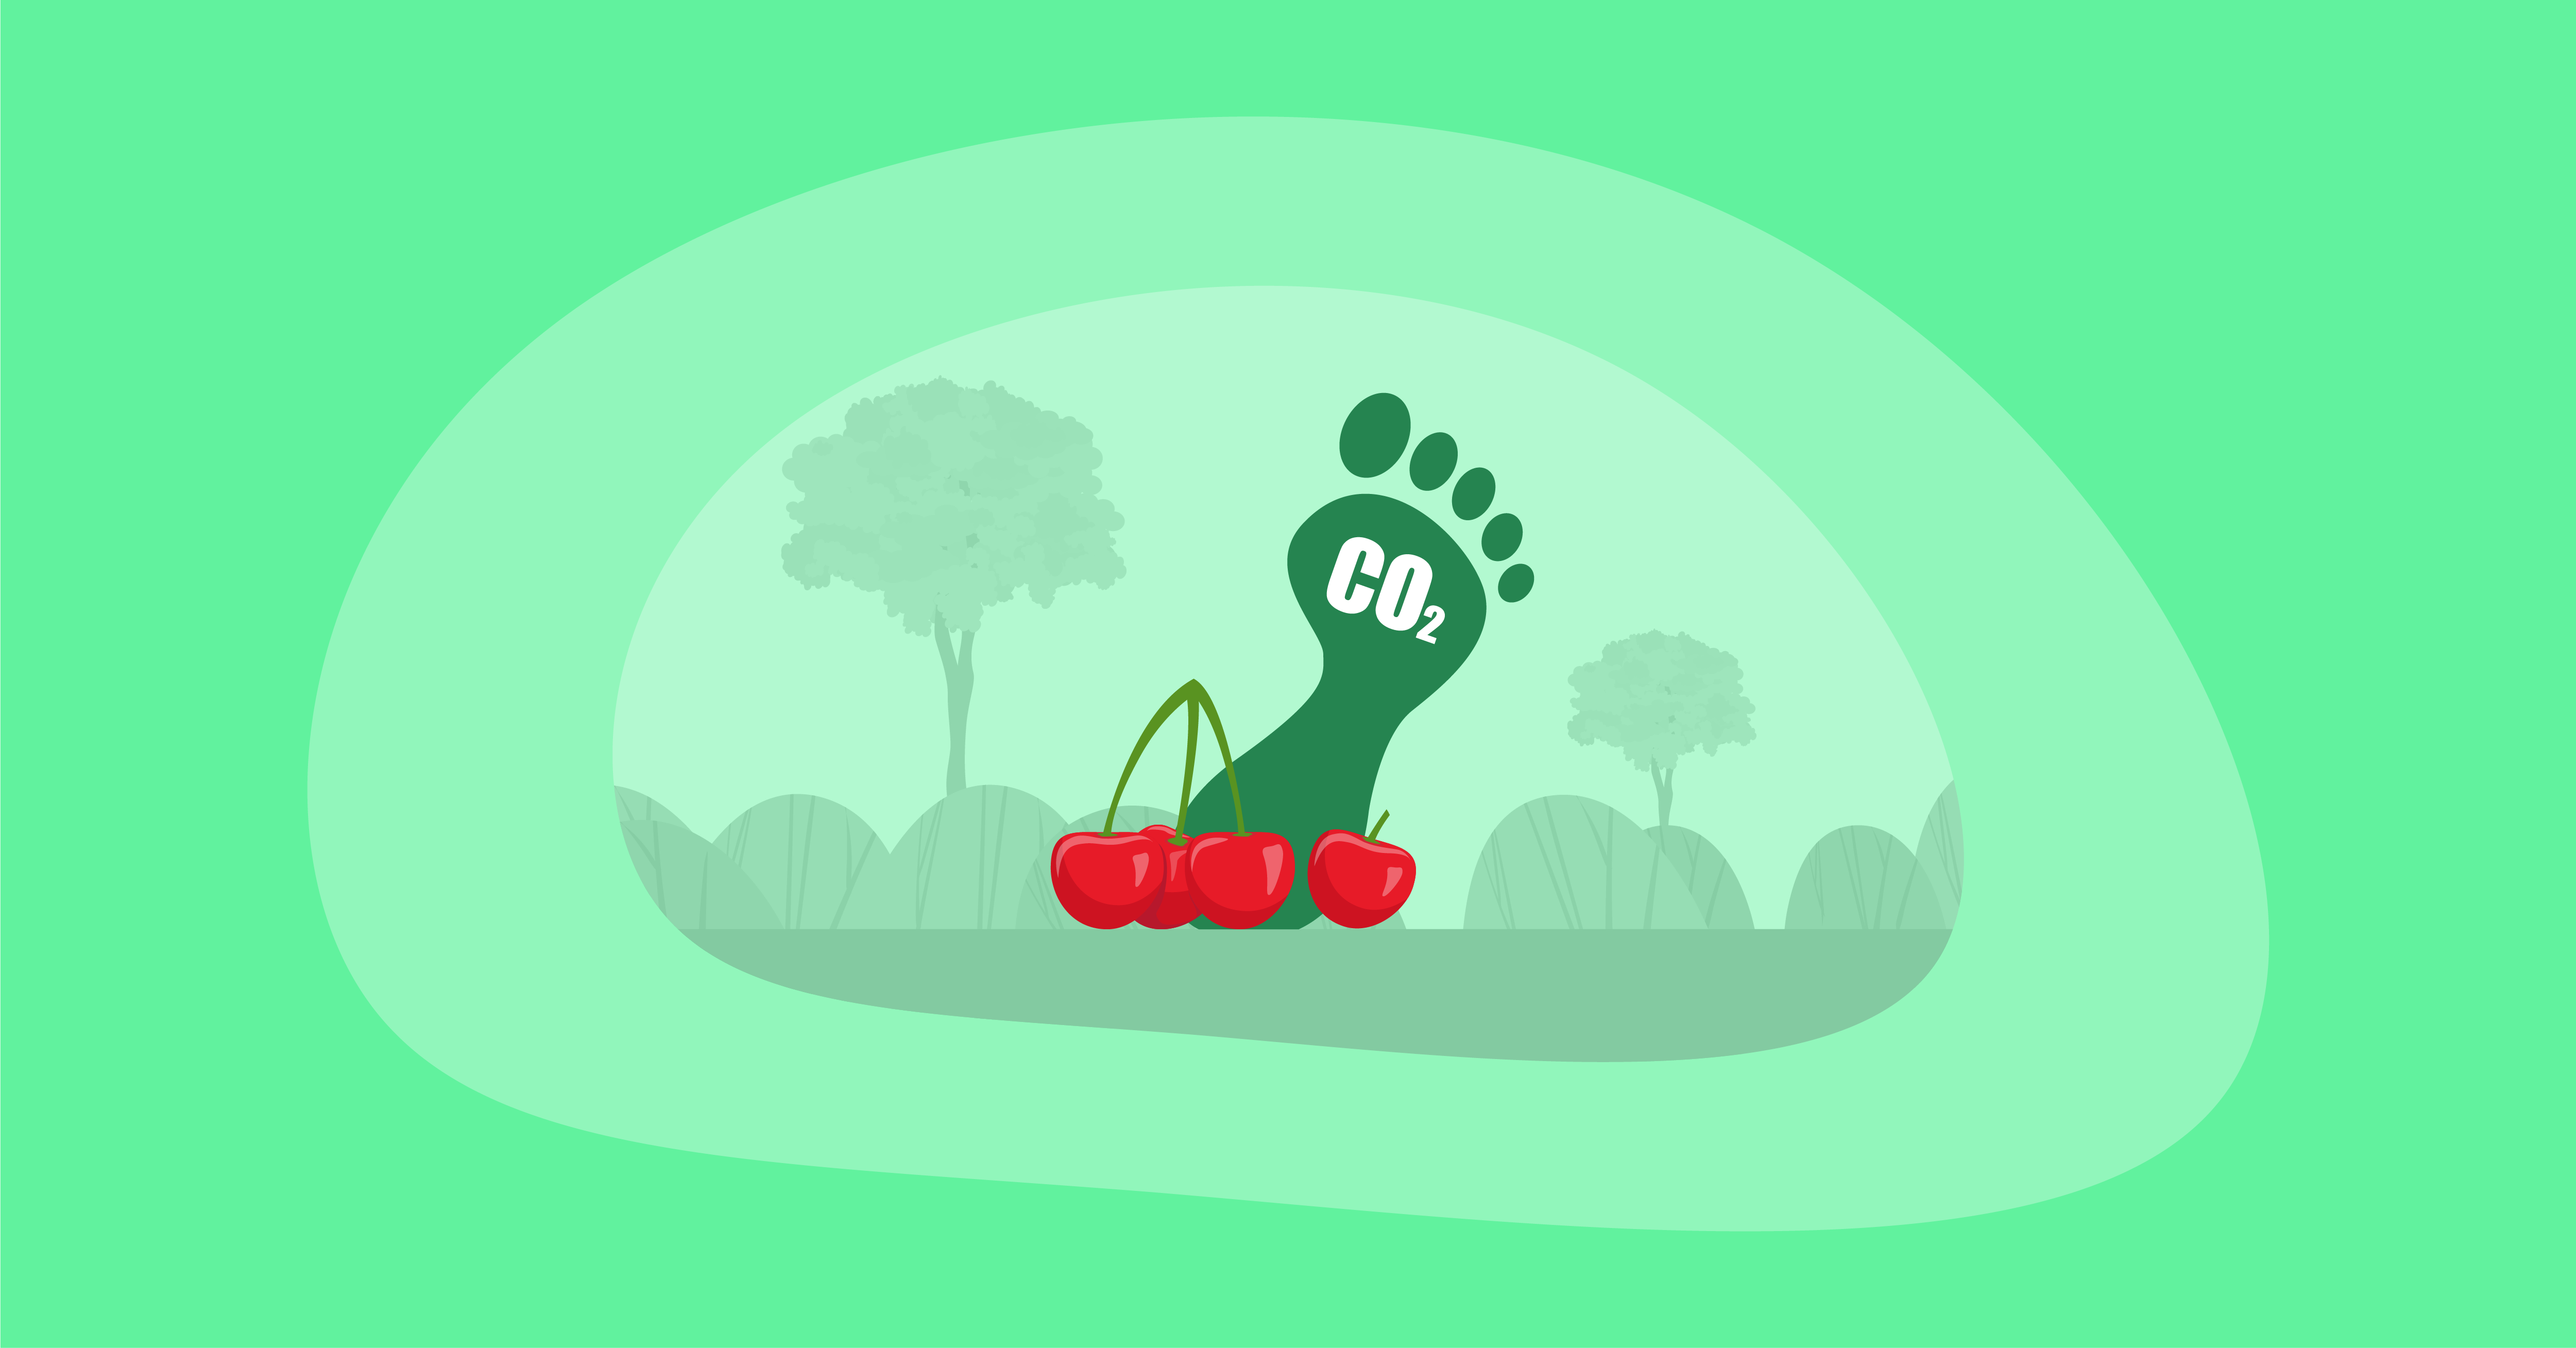 Attempted illustration of cherries with their carbon footprint